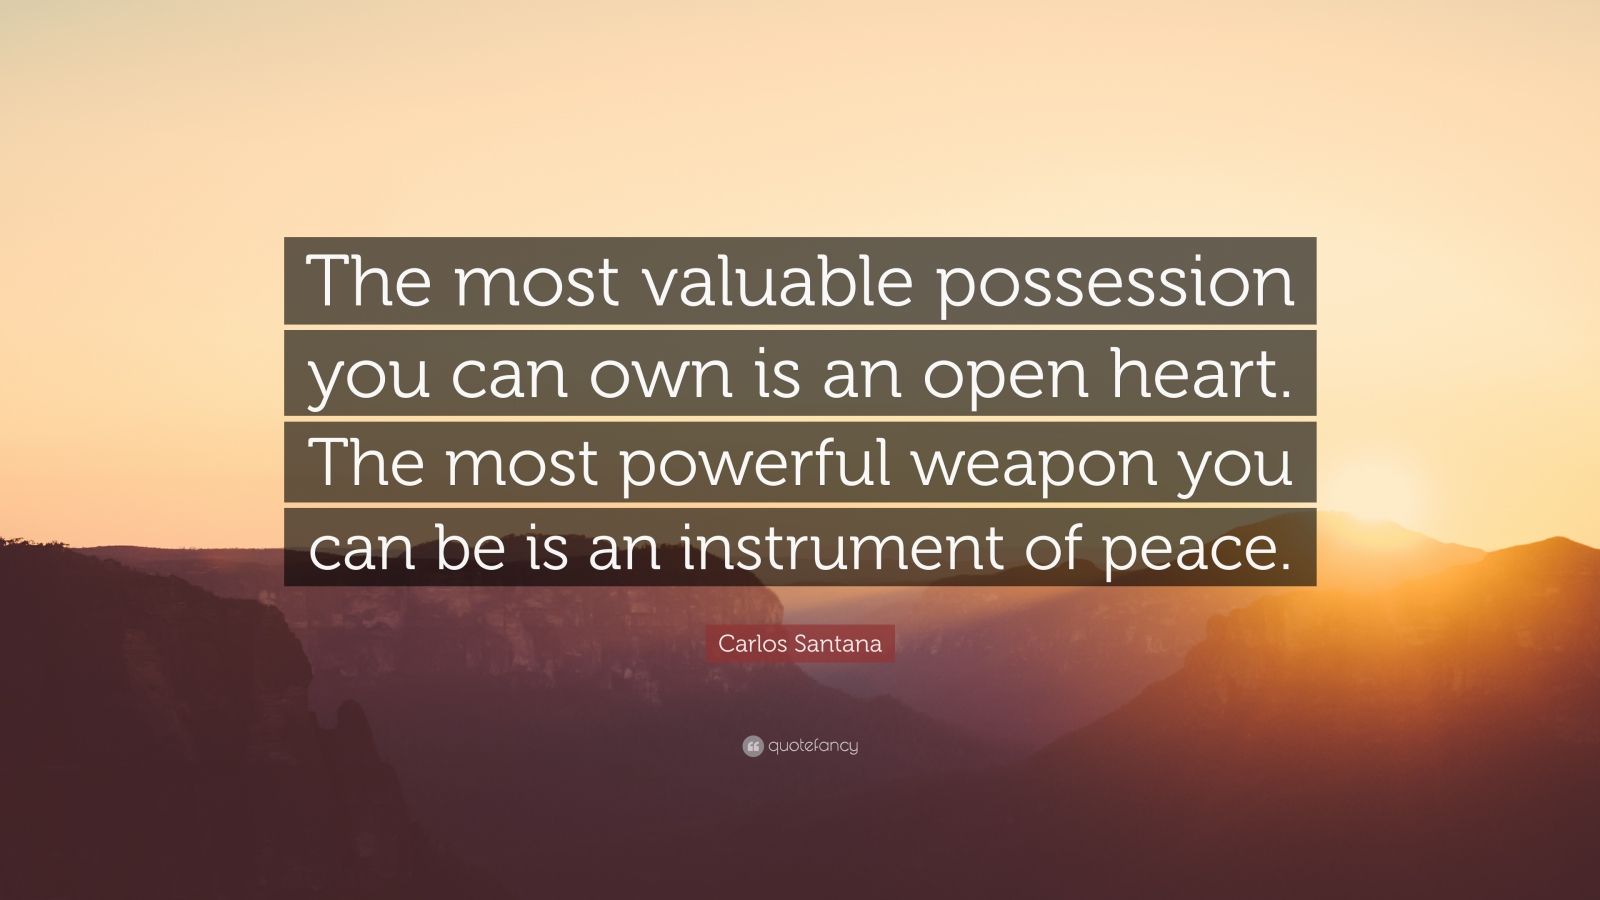 Most valued possession